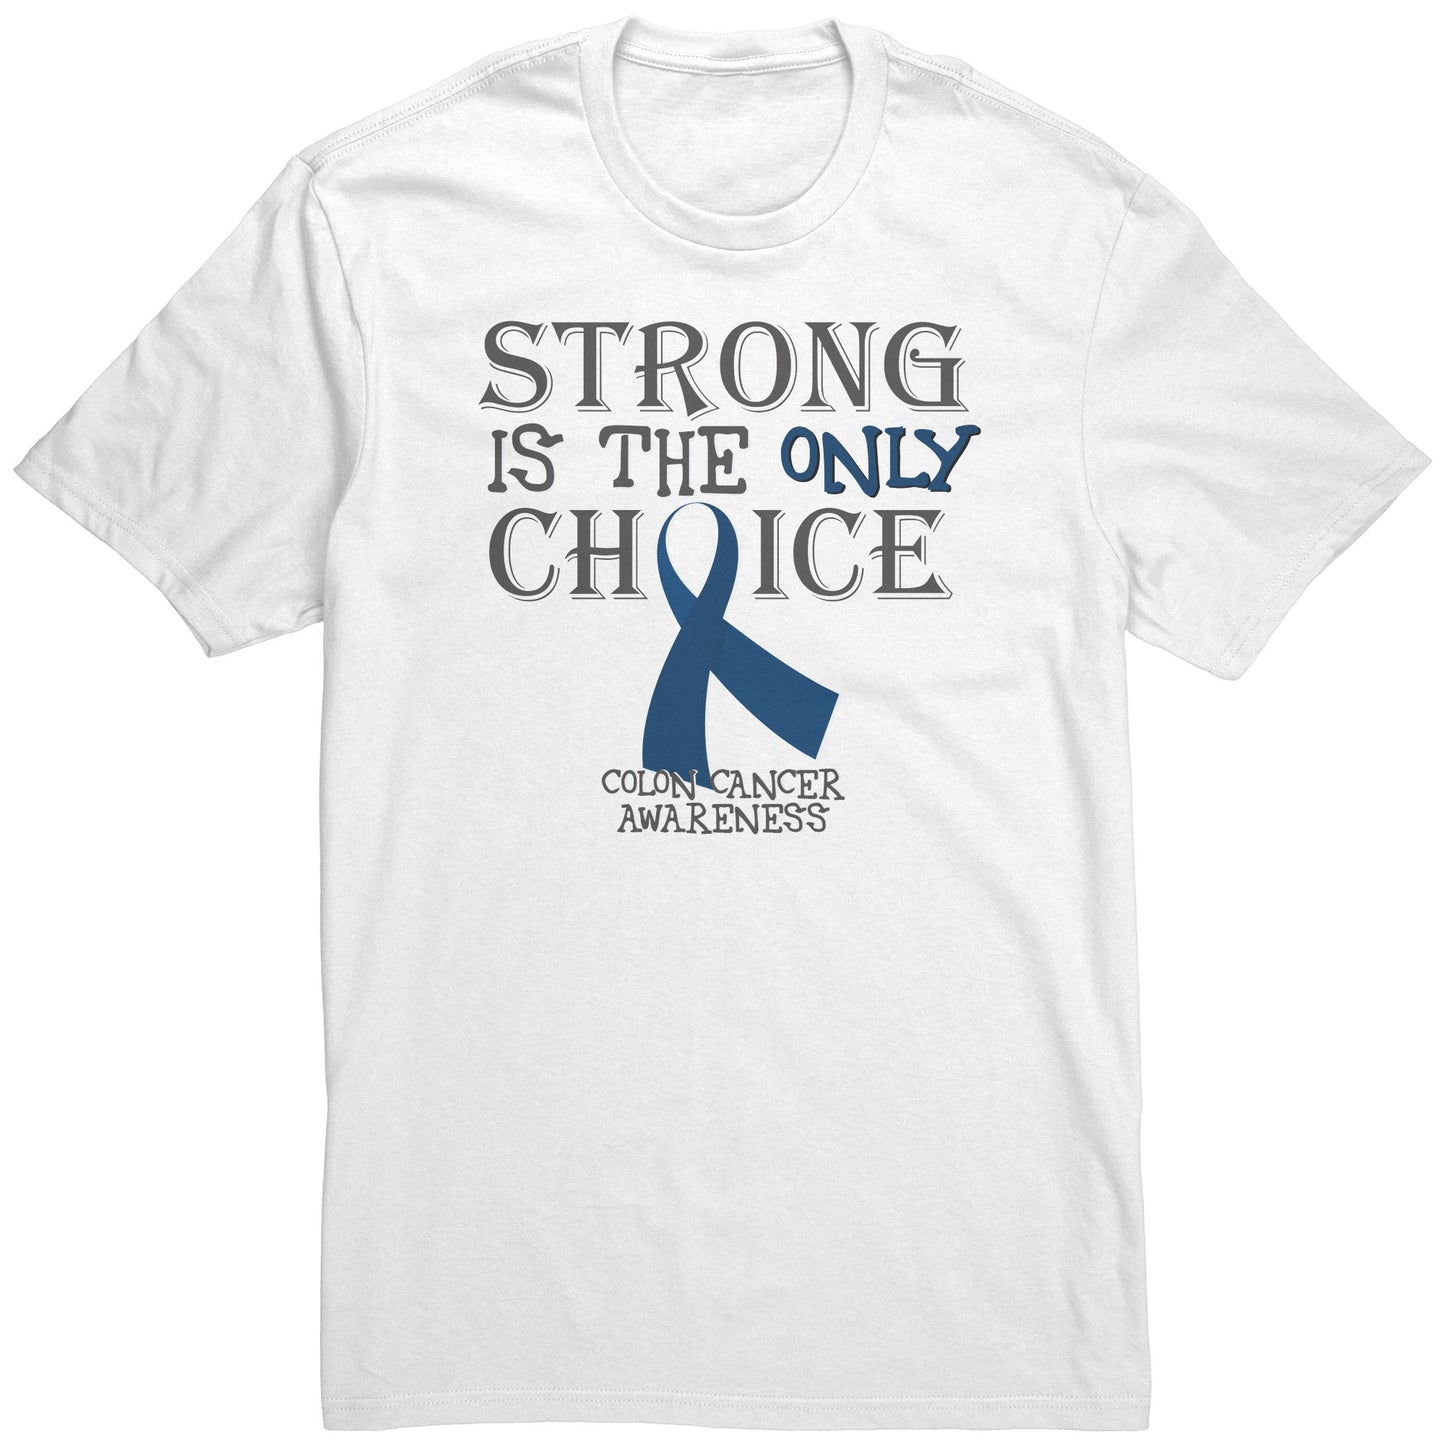 Strong is the Only Choice -Colon Cancer Awareness T-Shirt, Hoodie, Tank |x|